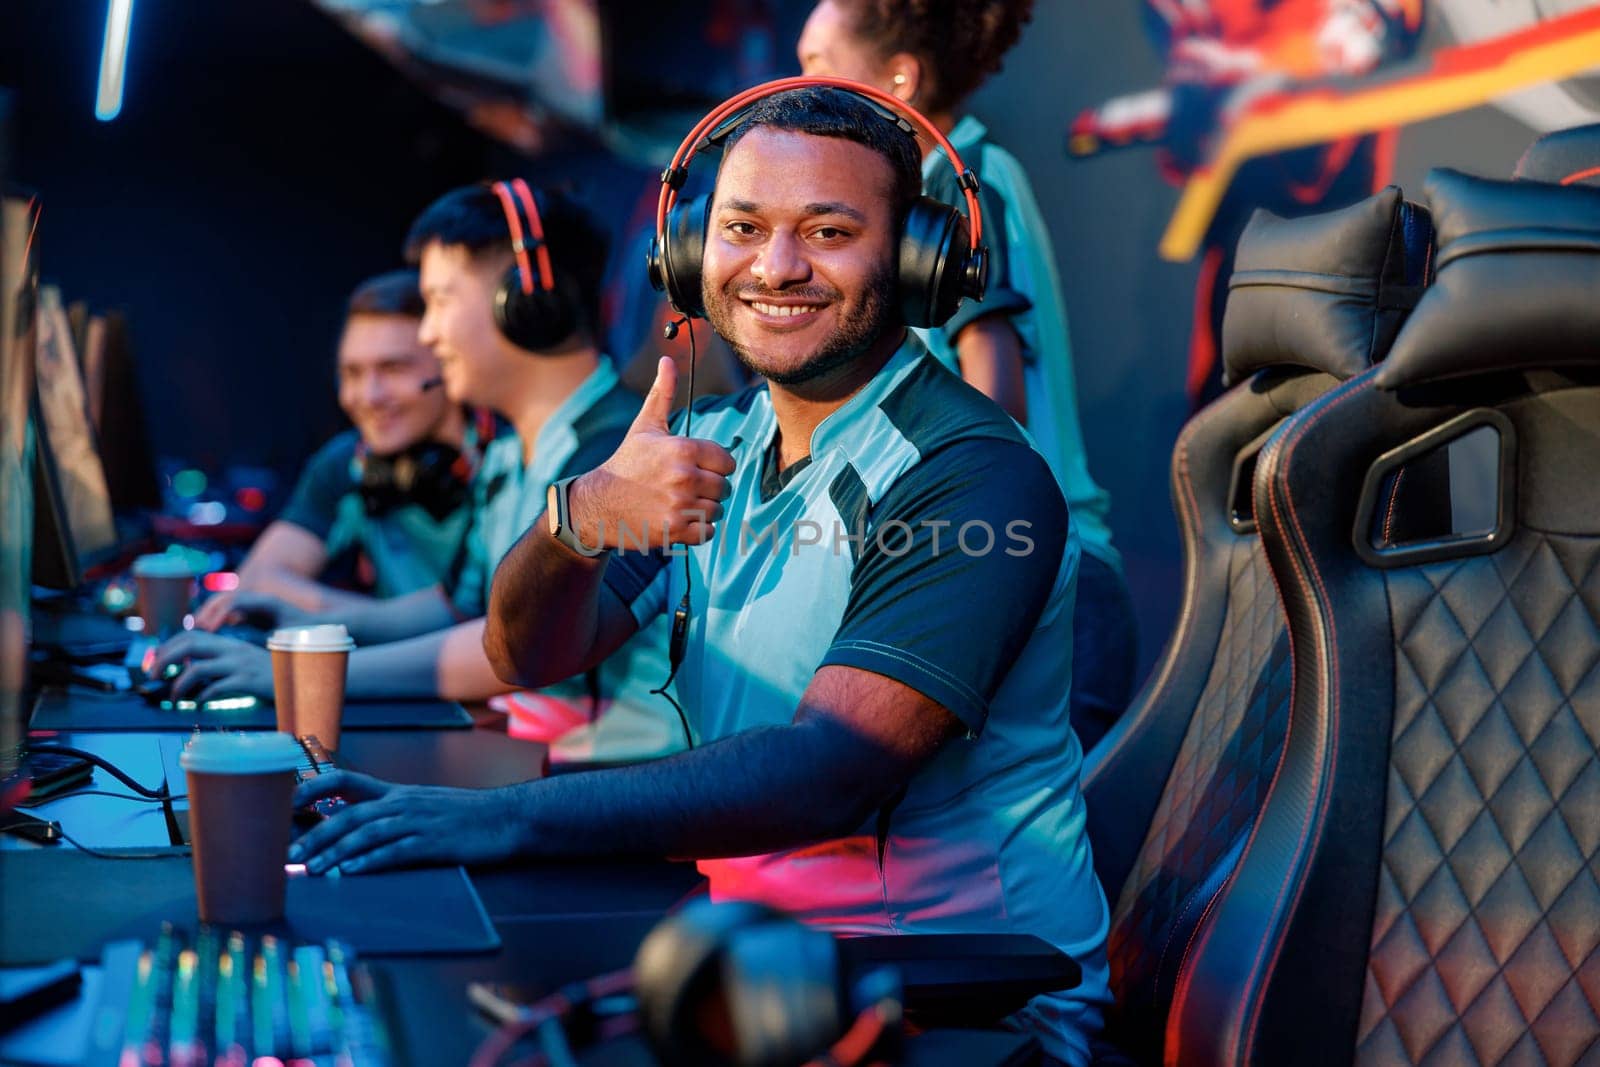 Happy young man expressing satisfaction with game while giving thumbs up gesture during participation in international gaming event in gaming club